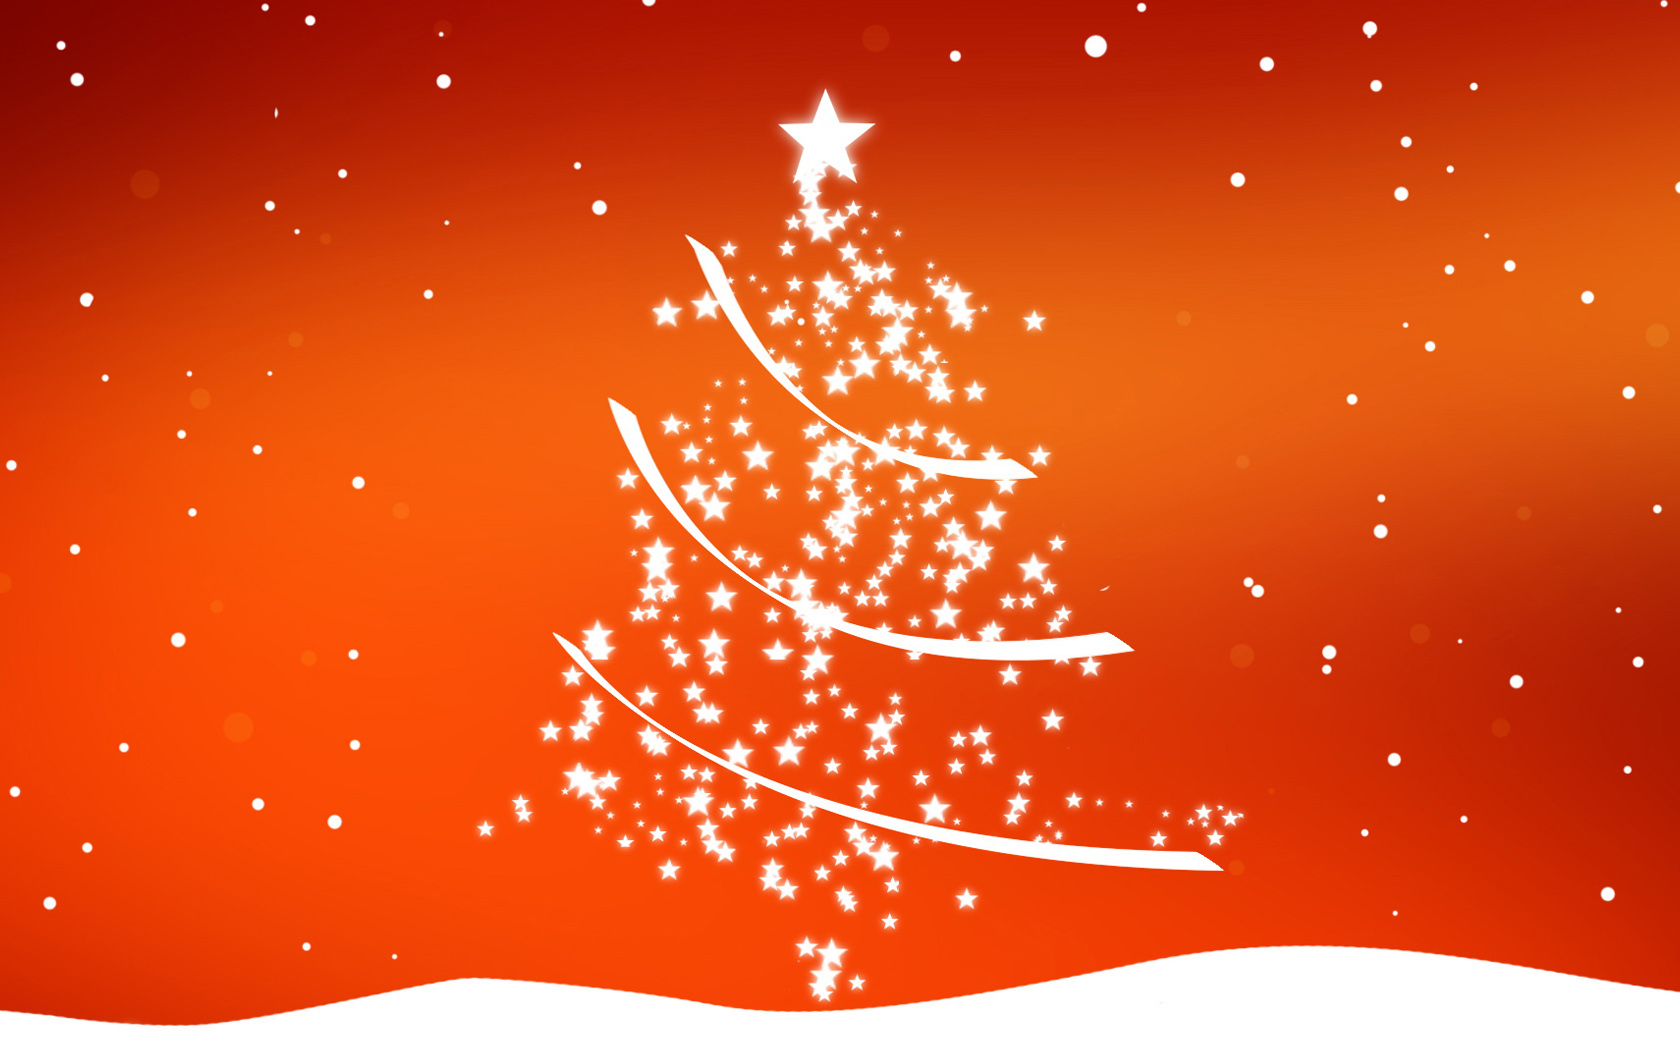 Christmas theme wallpaper download High Definition Wallpapers